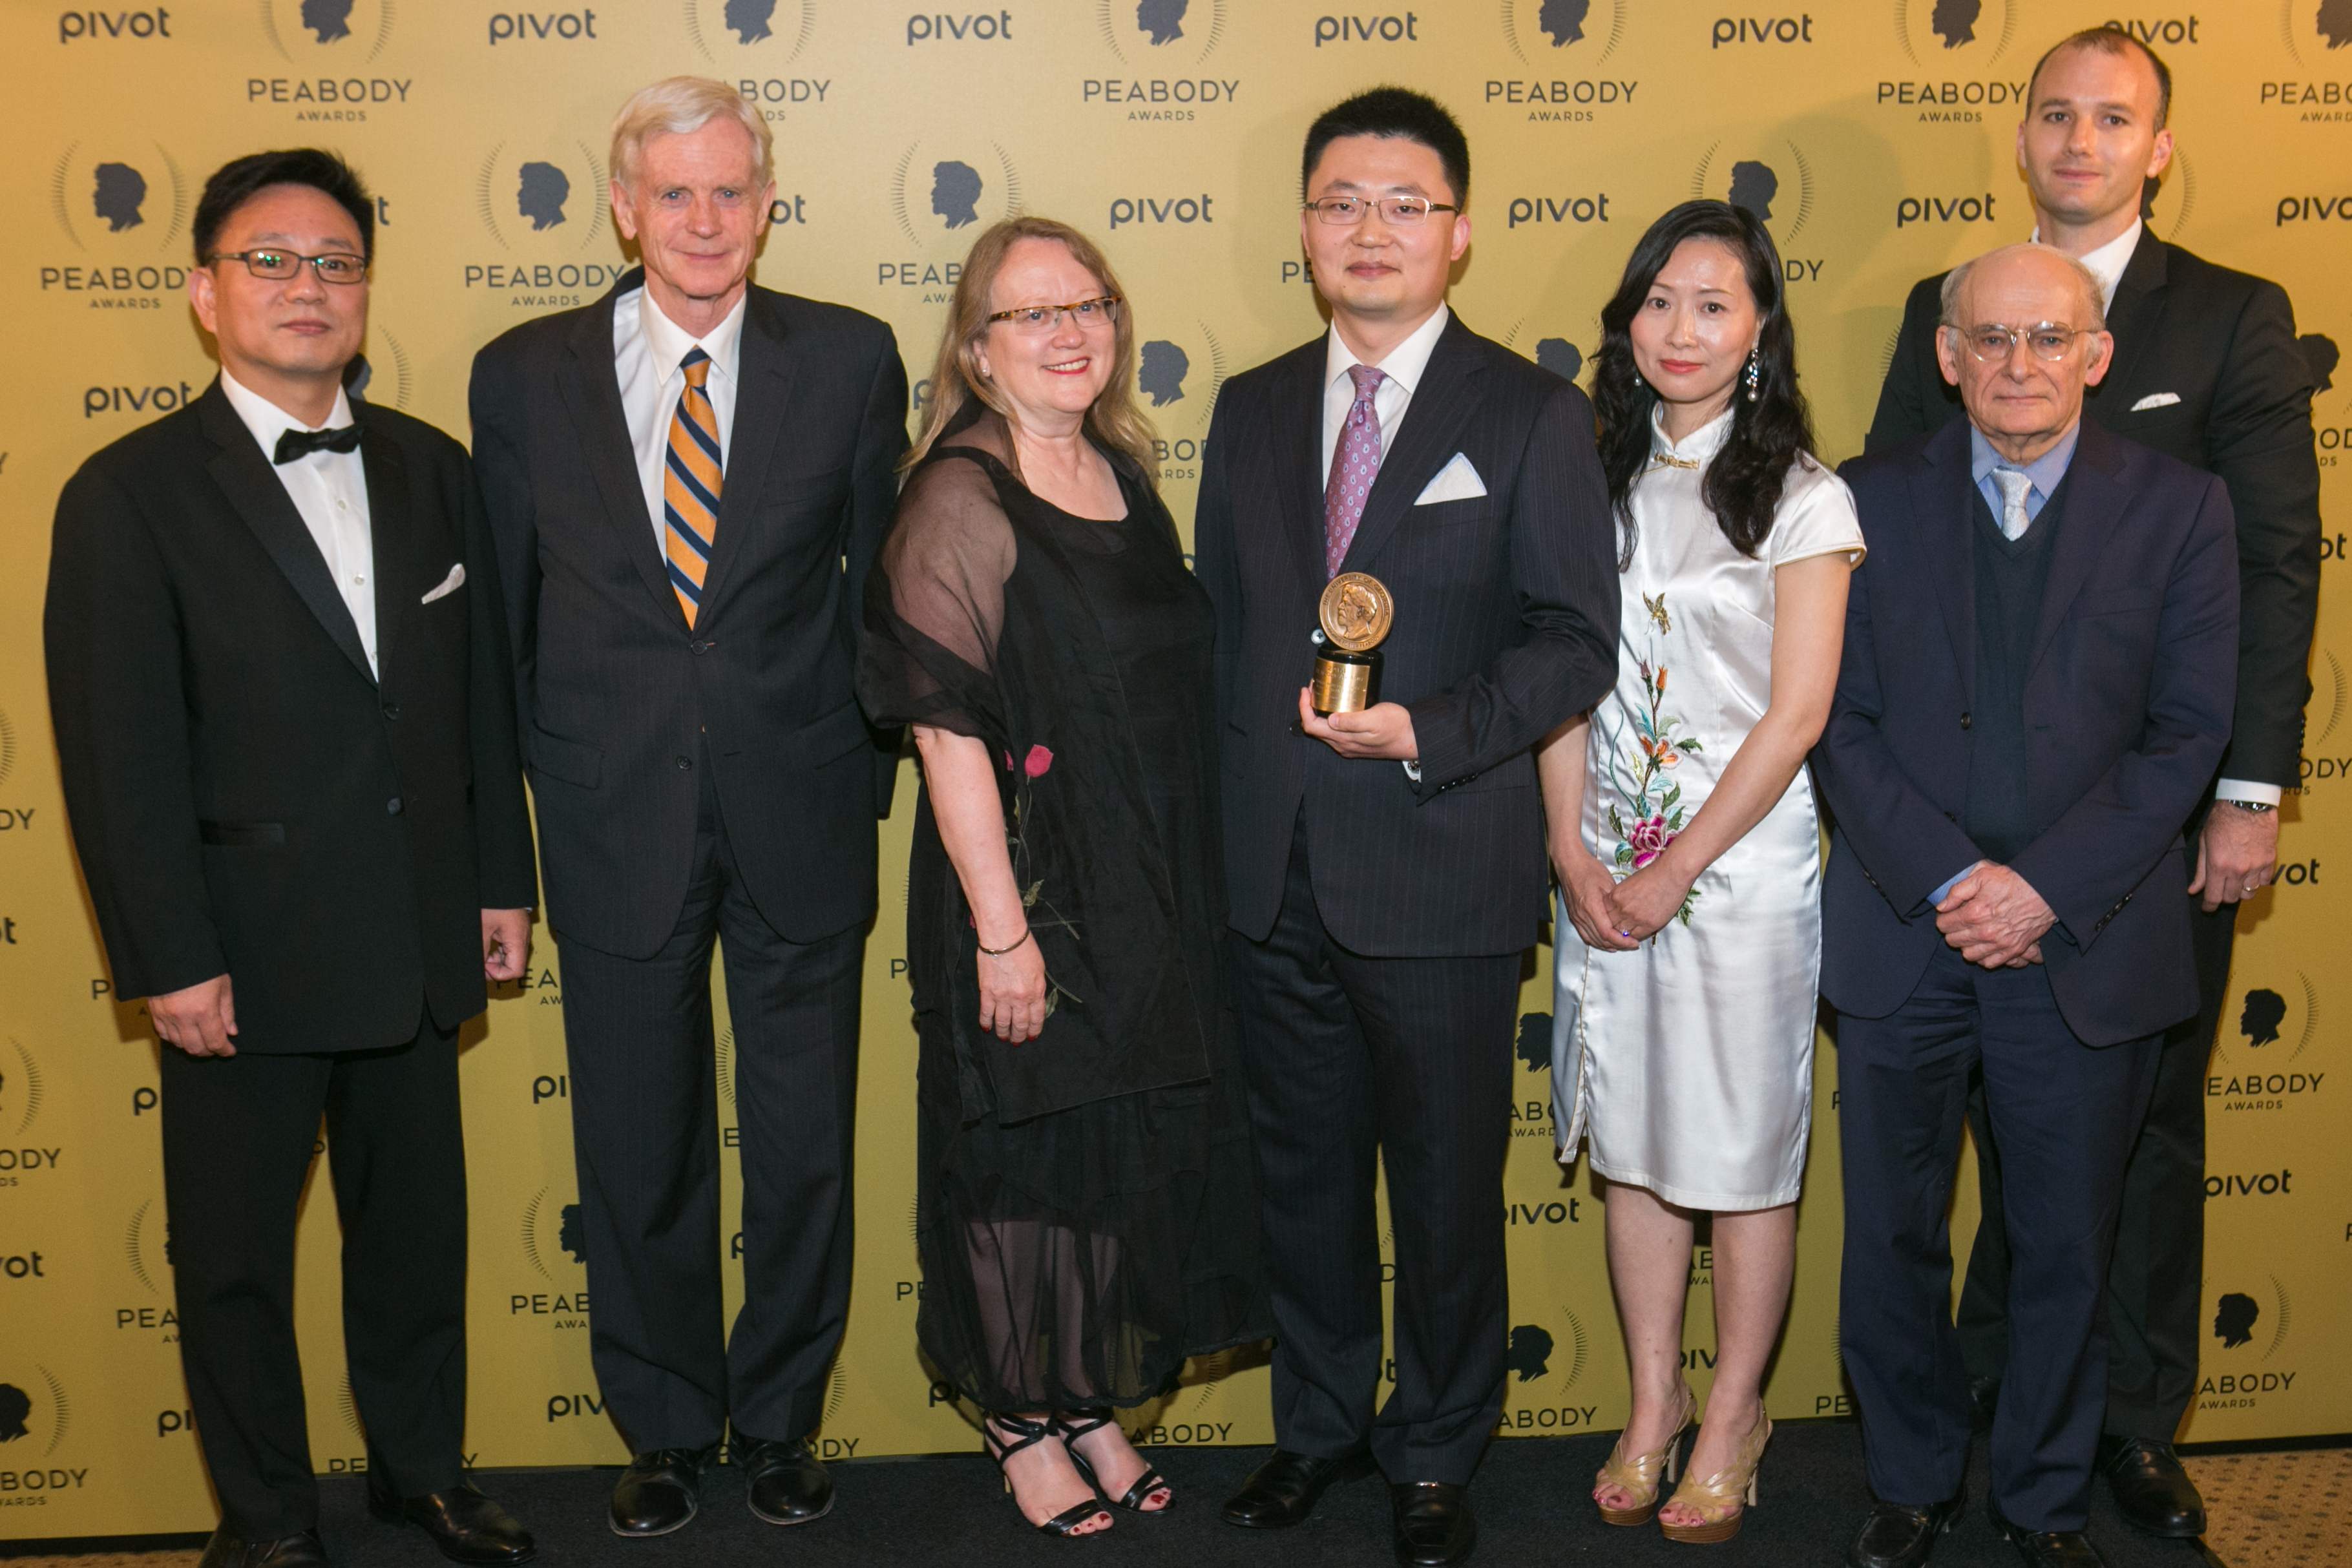 Leon Lee(C) poses with his award and guests at The 74th Annual Peabody Awards Ceremony at Cipriani Wall Street on May 31, 2015 in New York City.